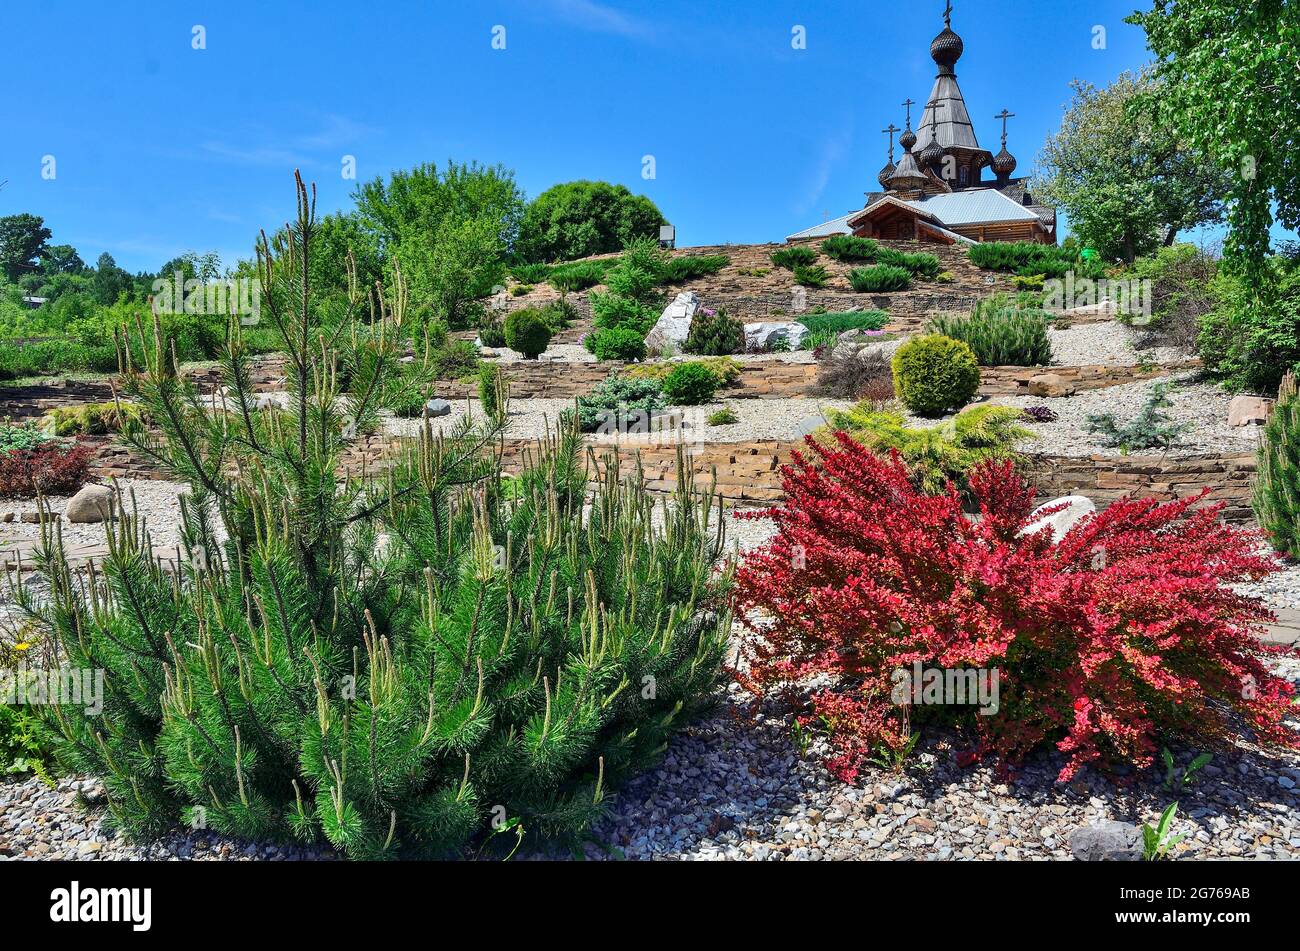 Ornamental stony garden with dwarf conifers on slope of hill - front yard of orthodox Temple. Cultivar Thunbergs barberry (Berberis thunbergii 'Red Ro Stock Photo